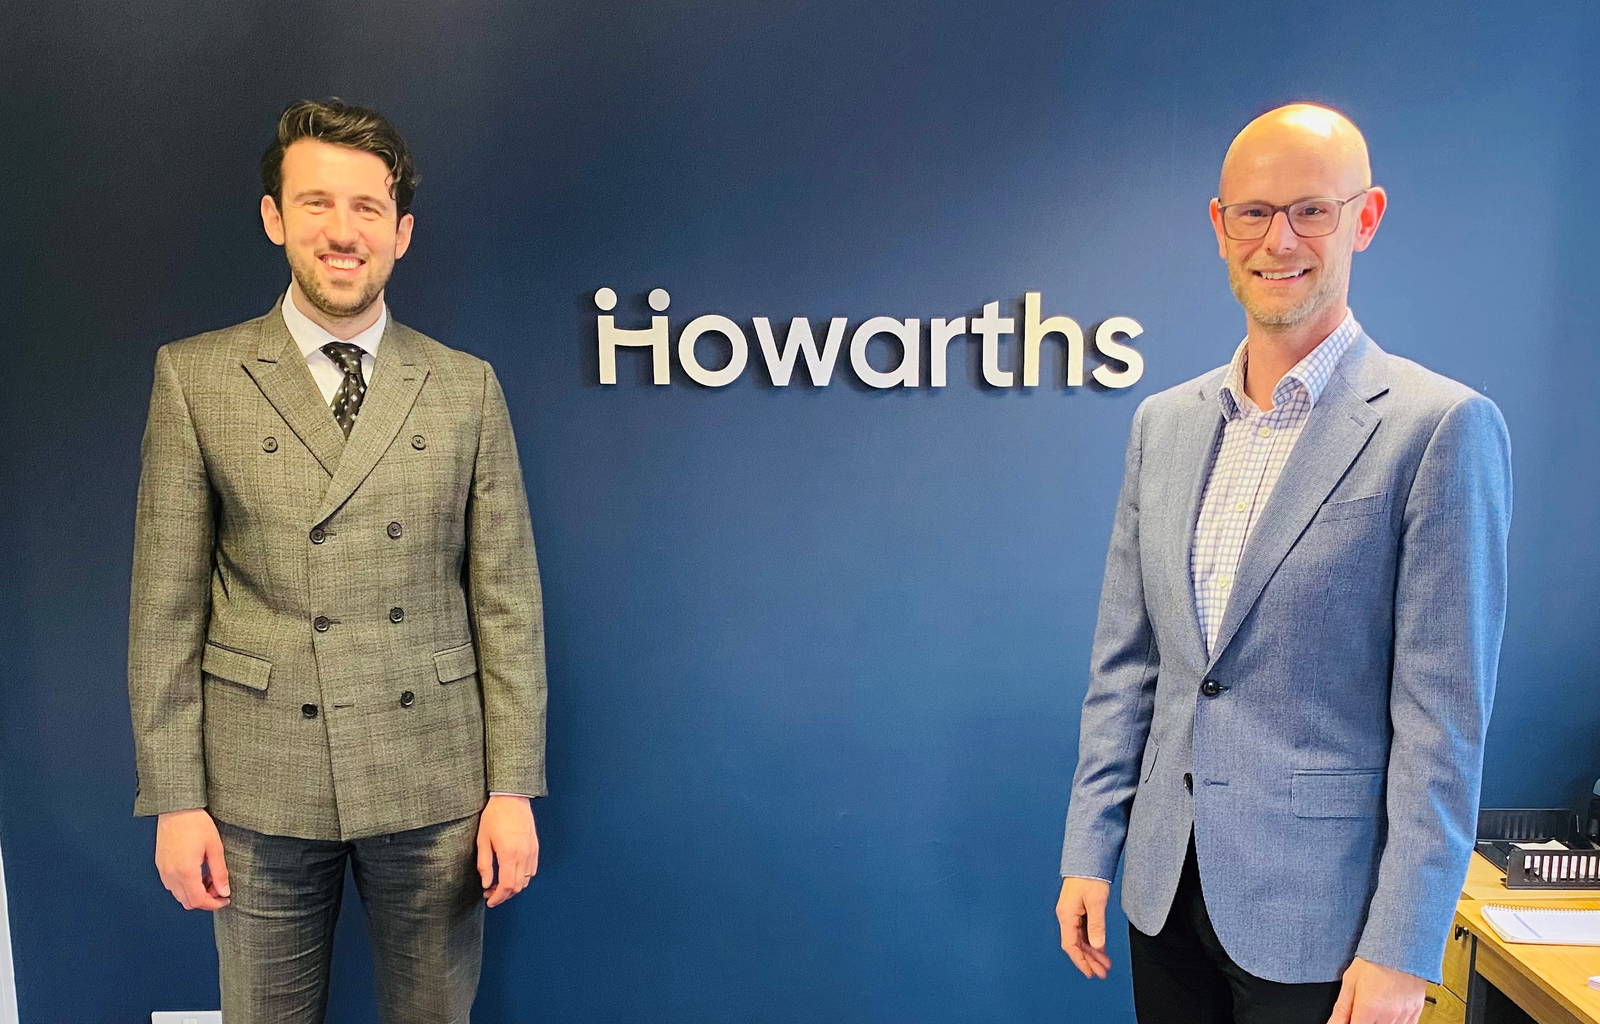 Howarths choose Paladin for brand and marketing brief